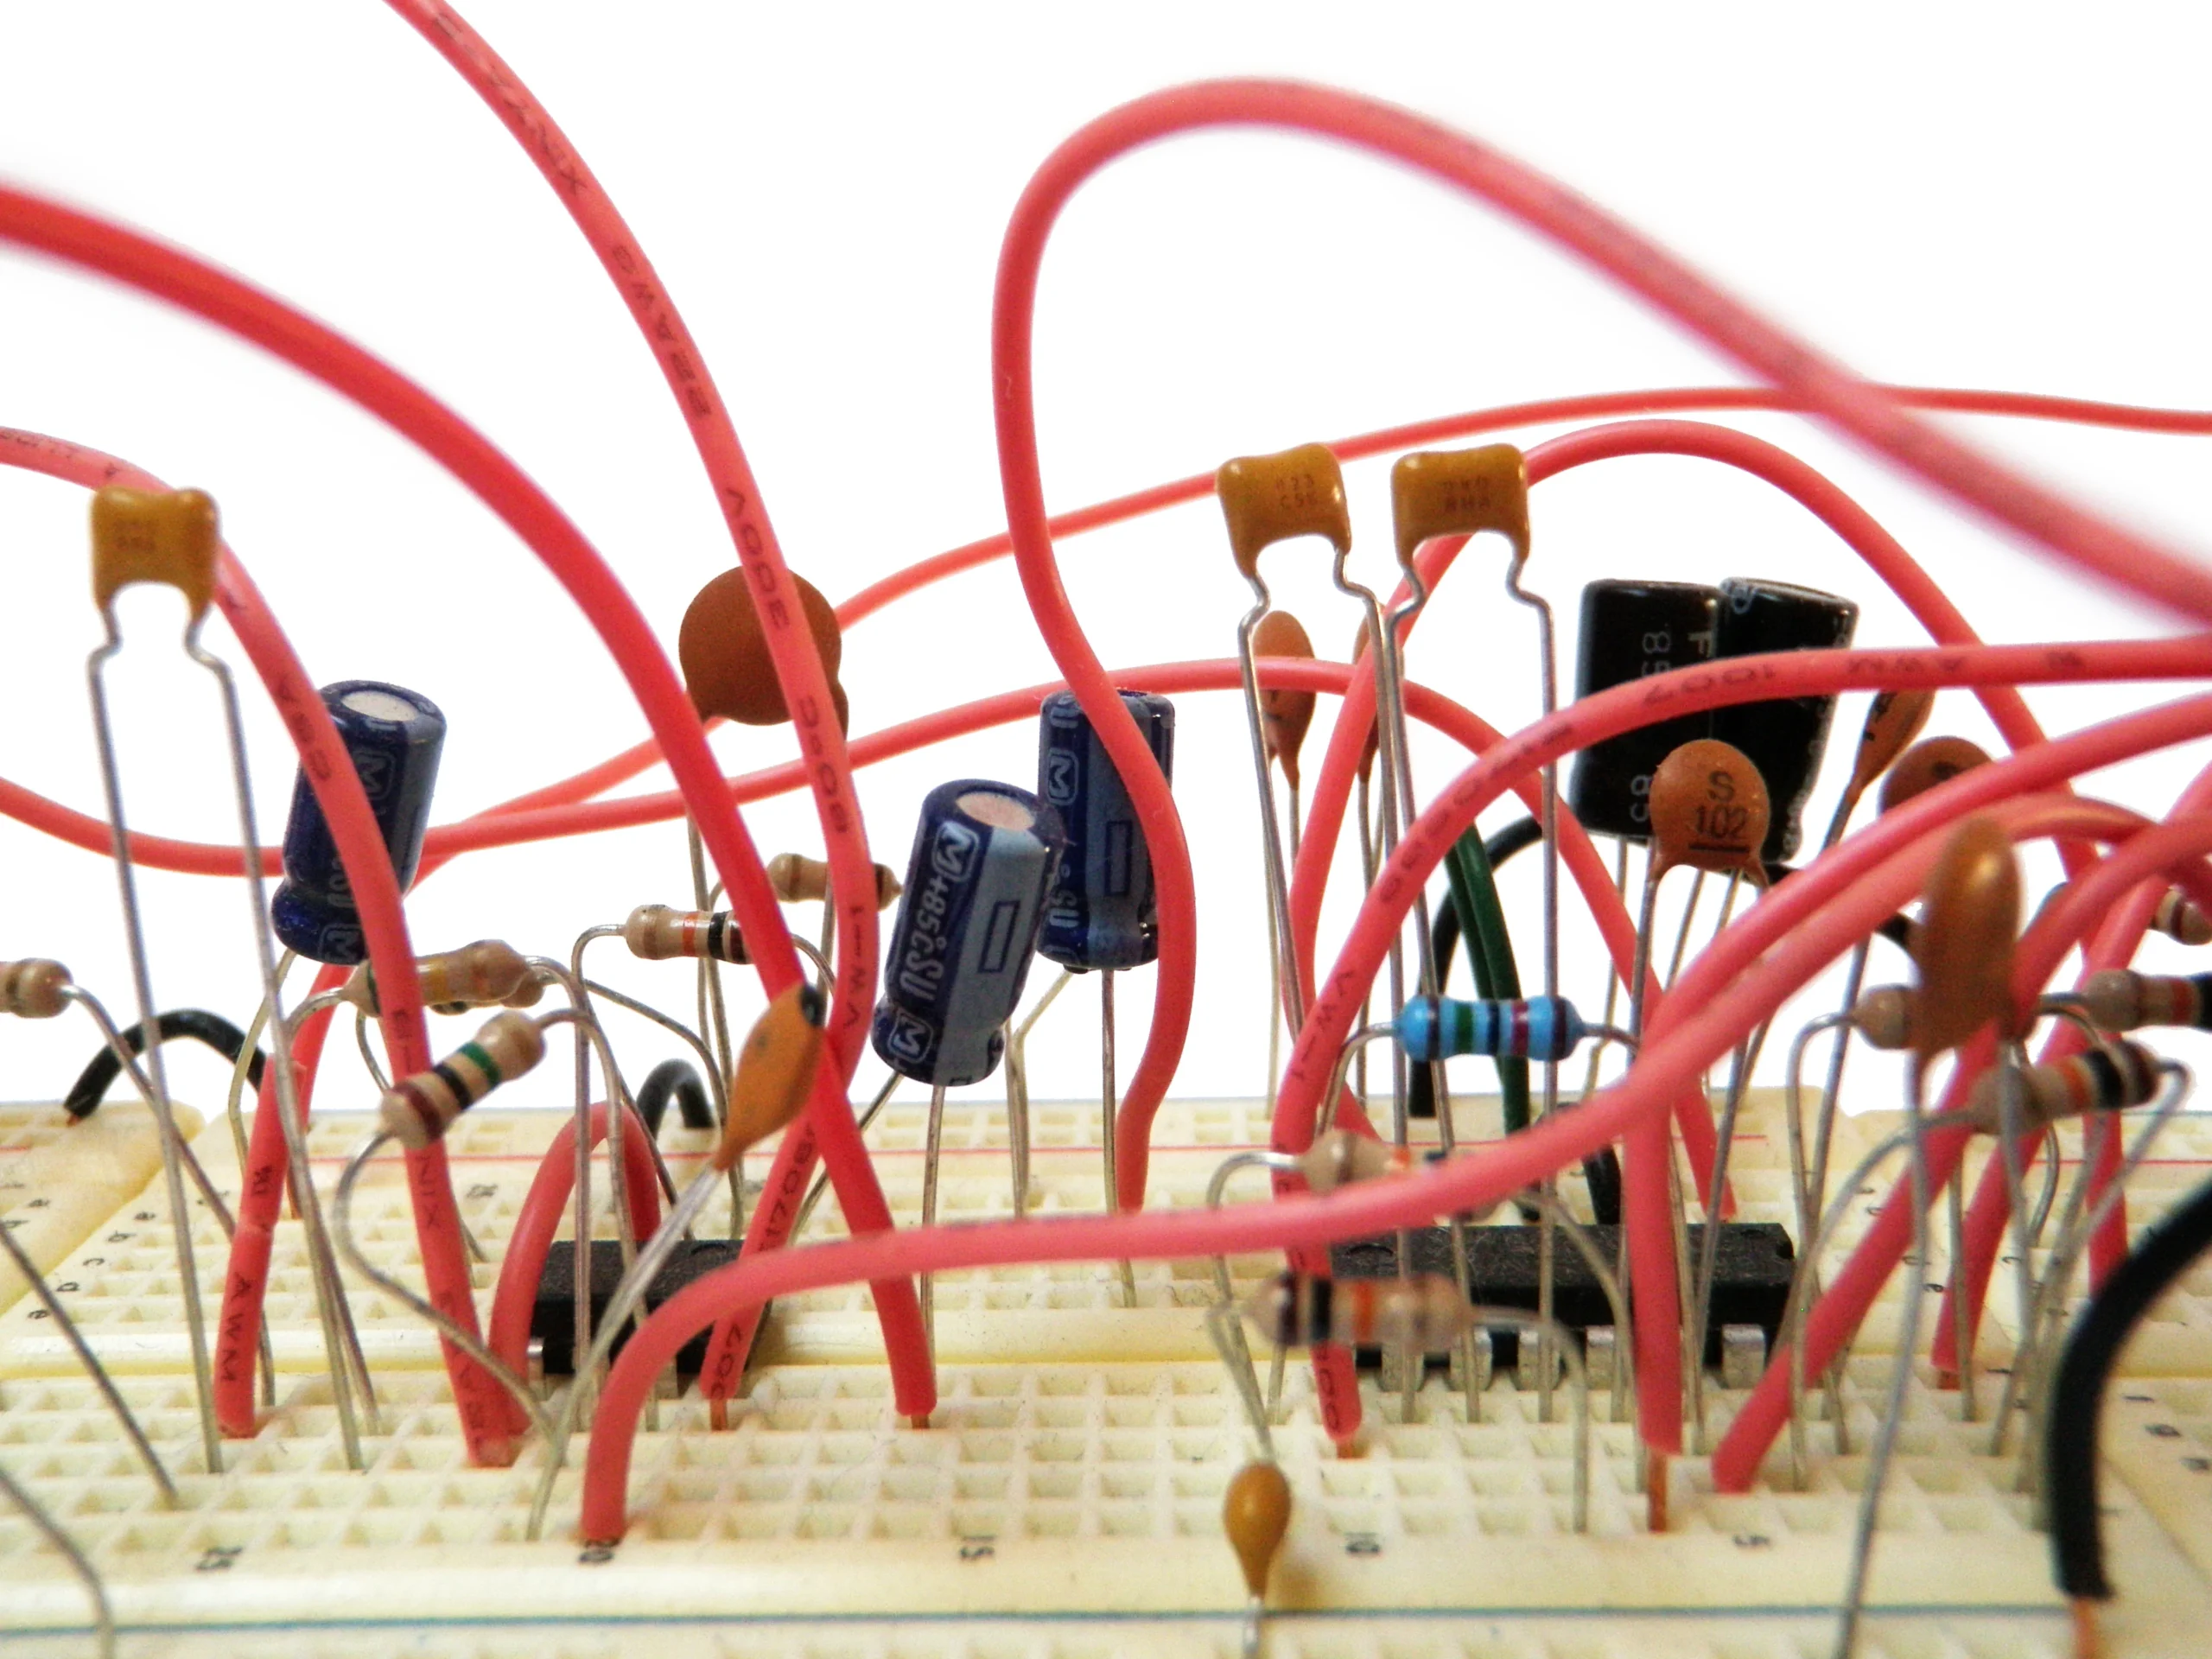 Basic and Practical Electronics scaled Course